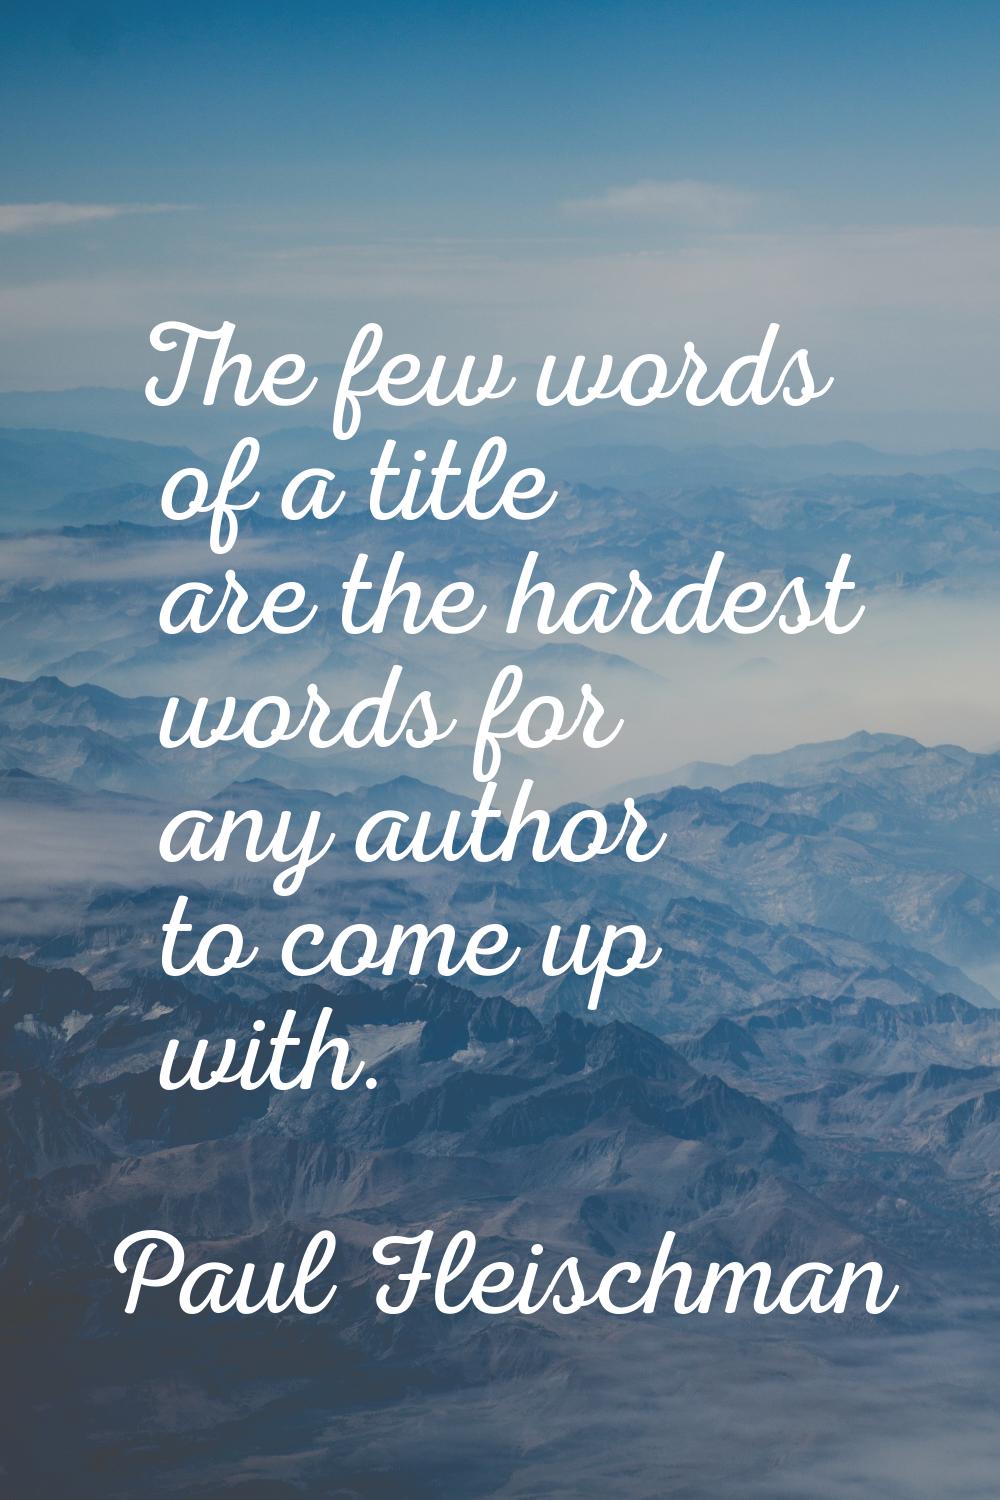 The few words of a title are the hardest words for any author to come up with.